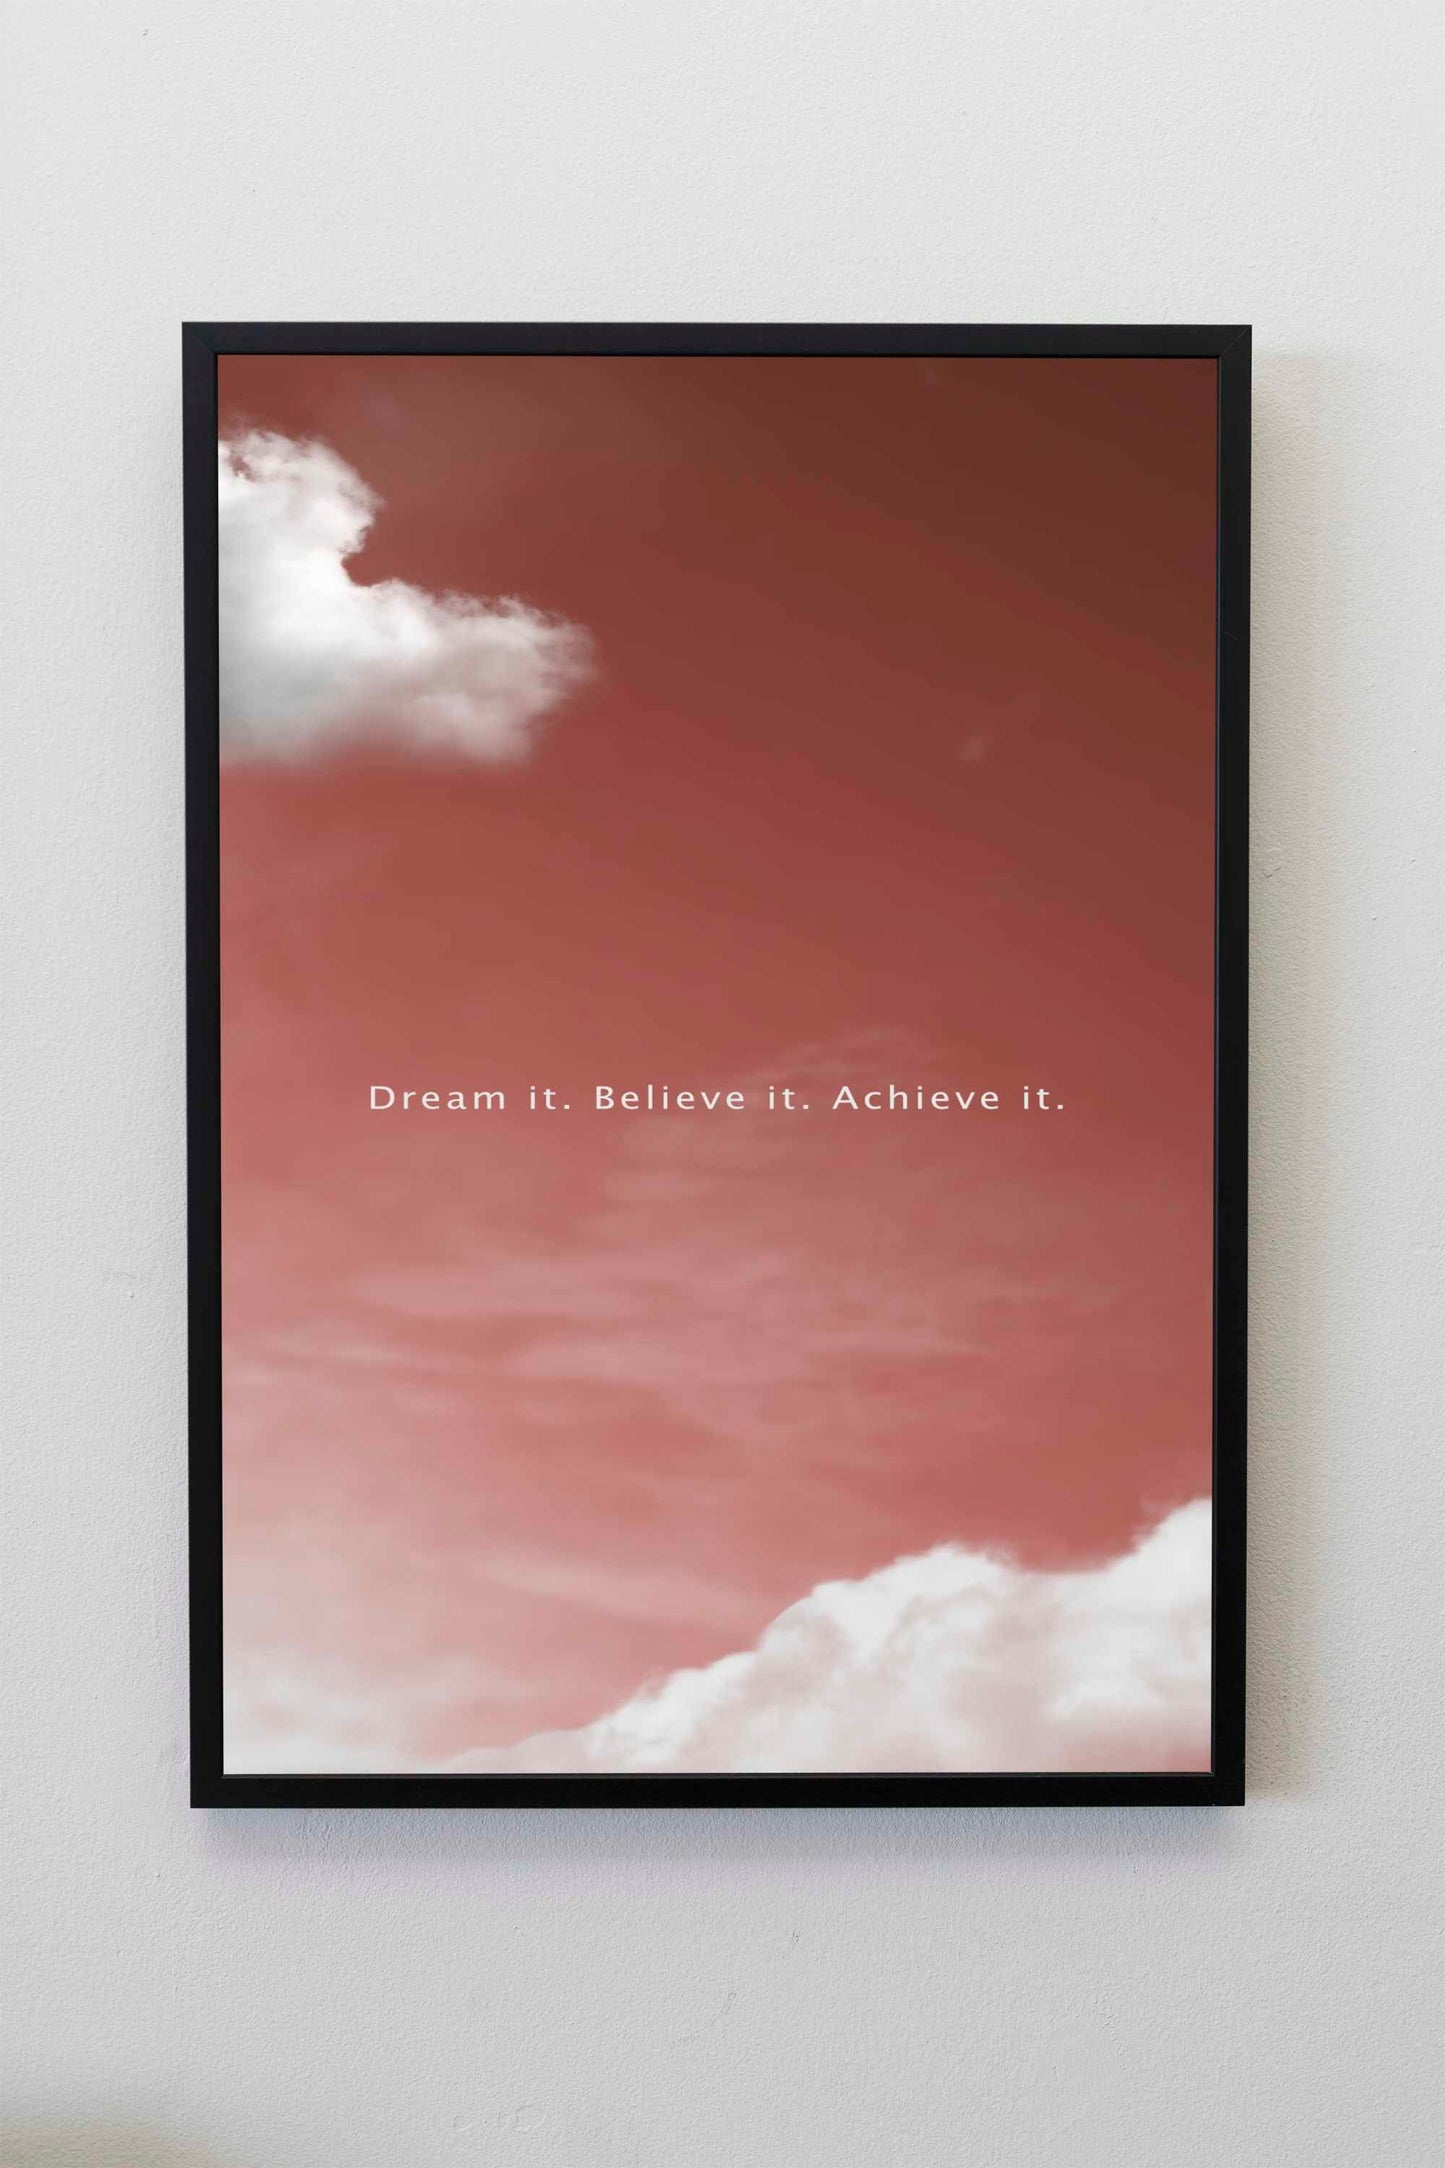 Dream it. Believe it. Achieve it. Quote Poster | Motivational Quotes | Inspirational Prints | Law of Attraction art | Manifest Poster